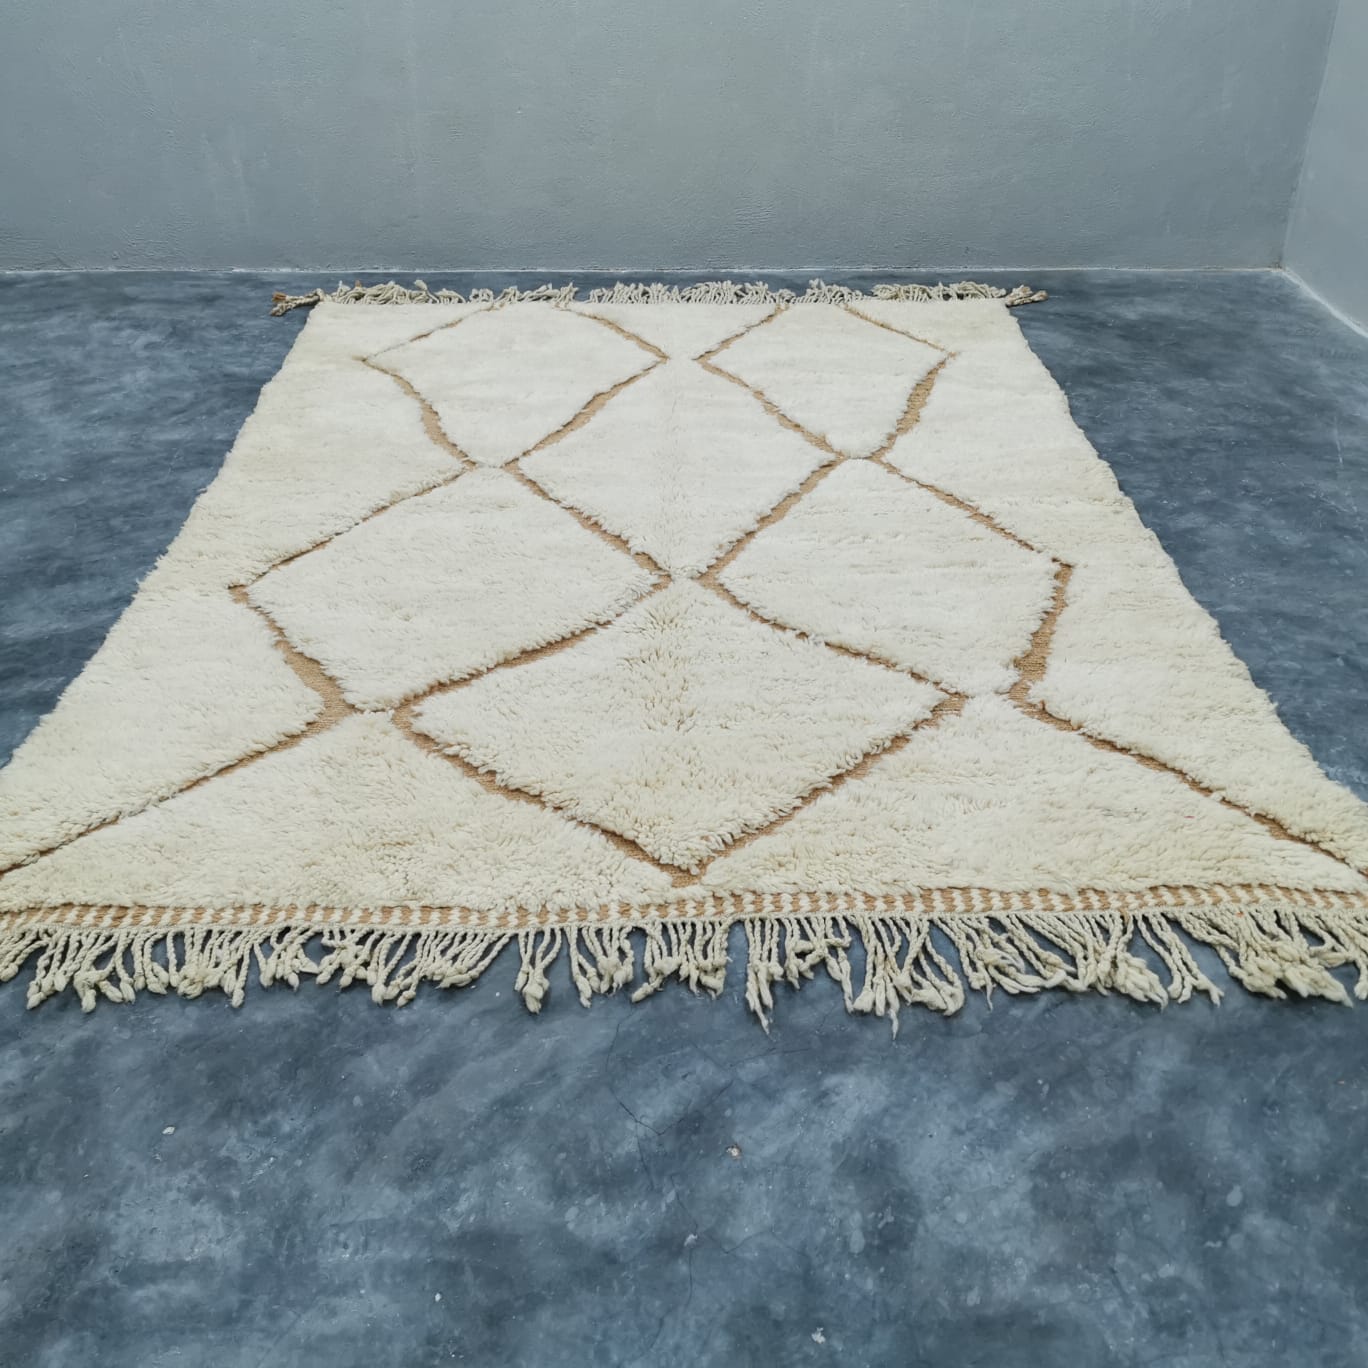 Timeless Moroccan Beni Ourain Rugs Transform Any Space